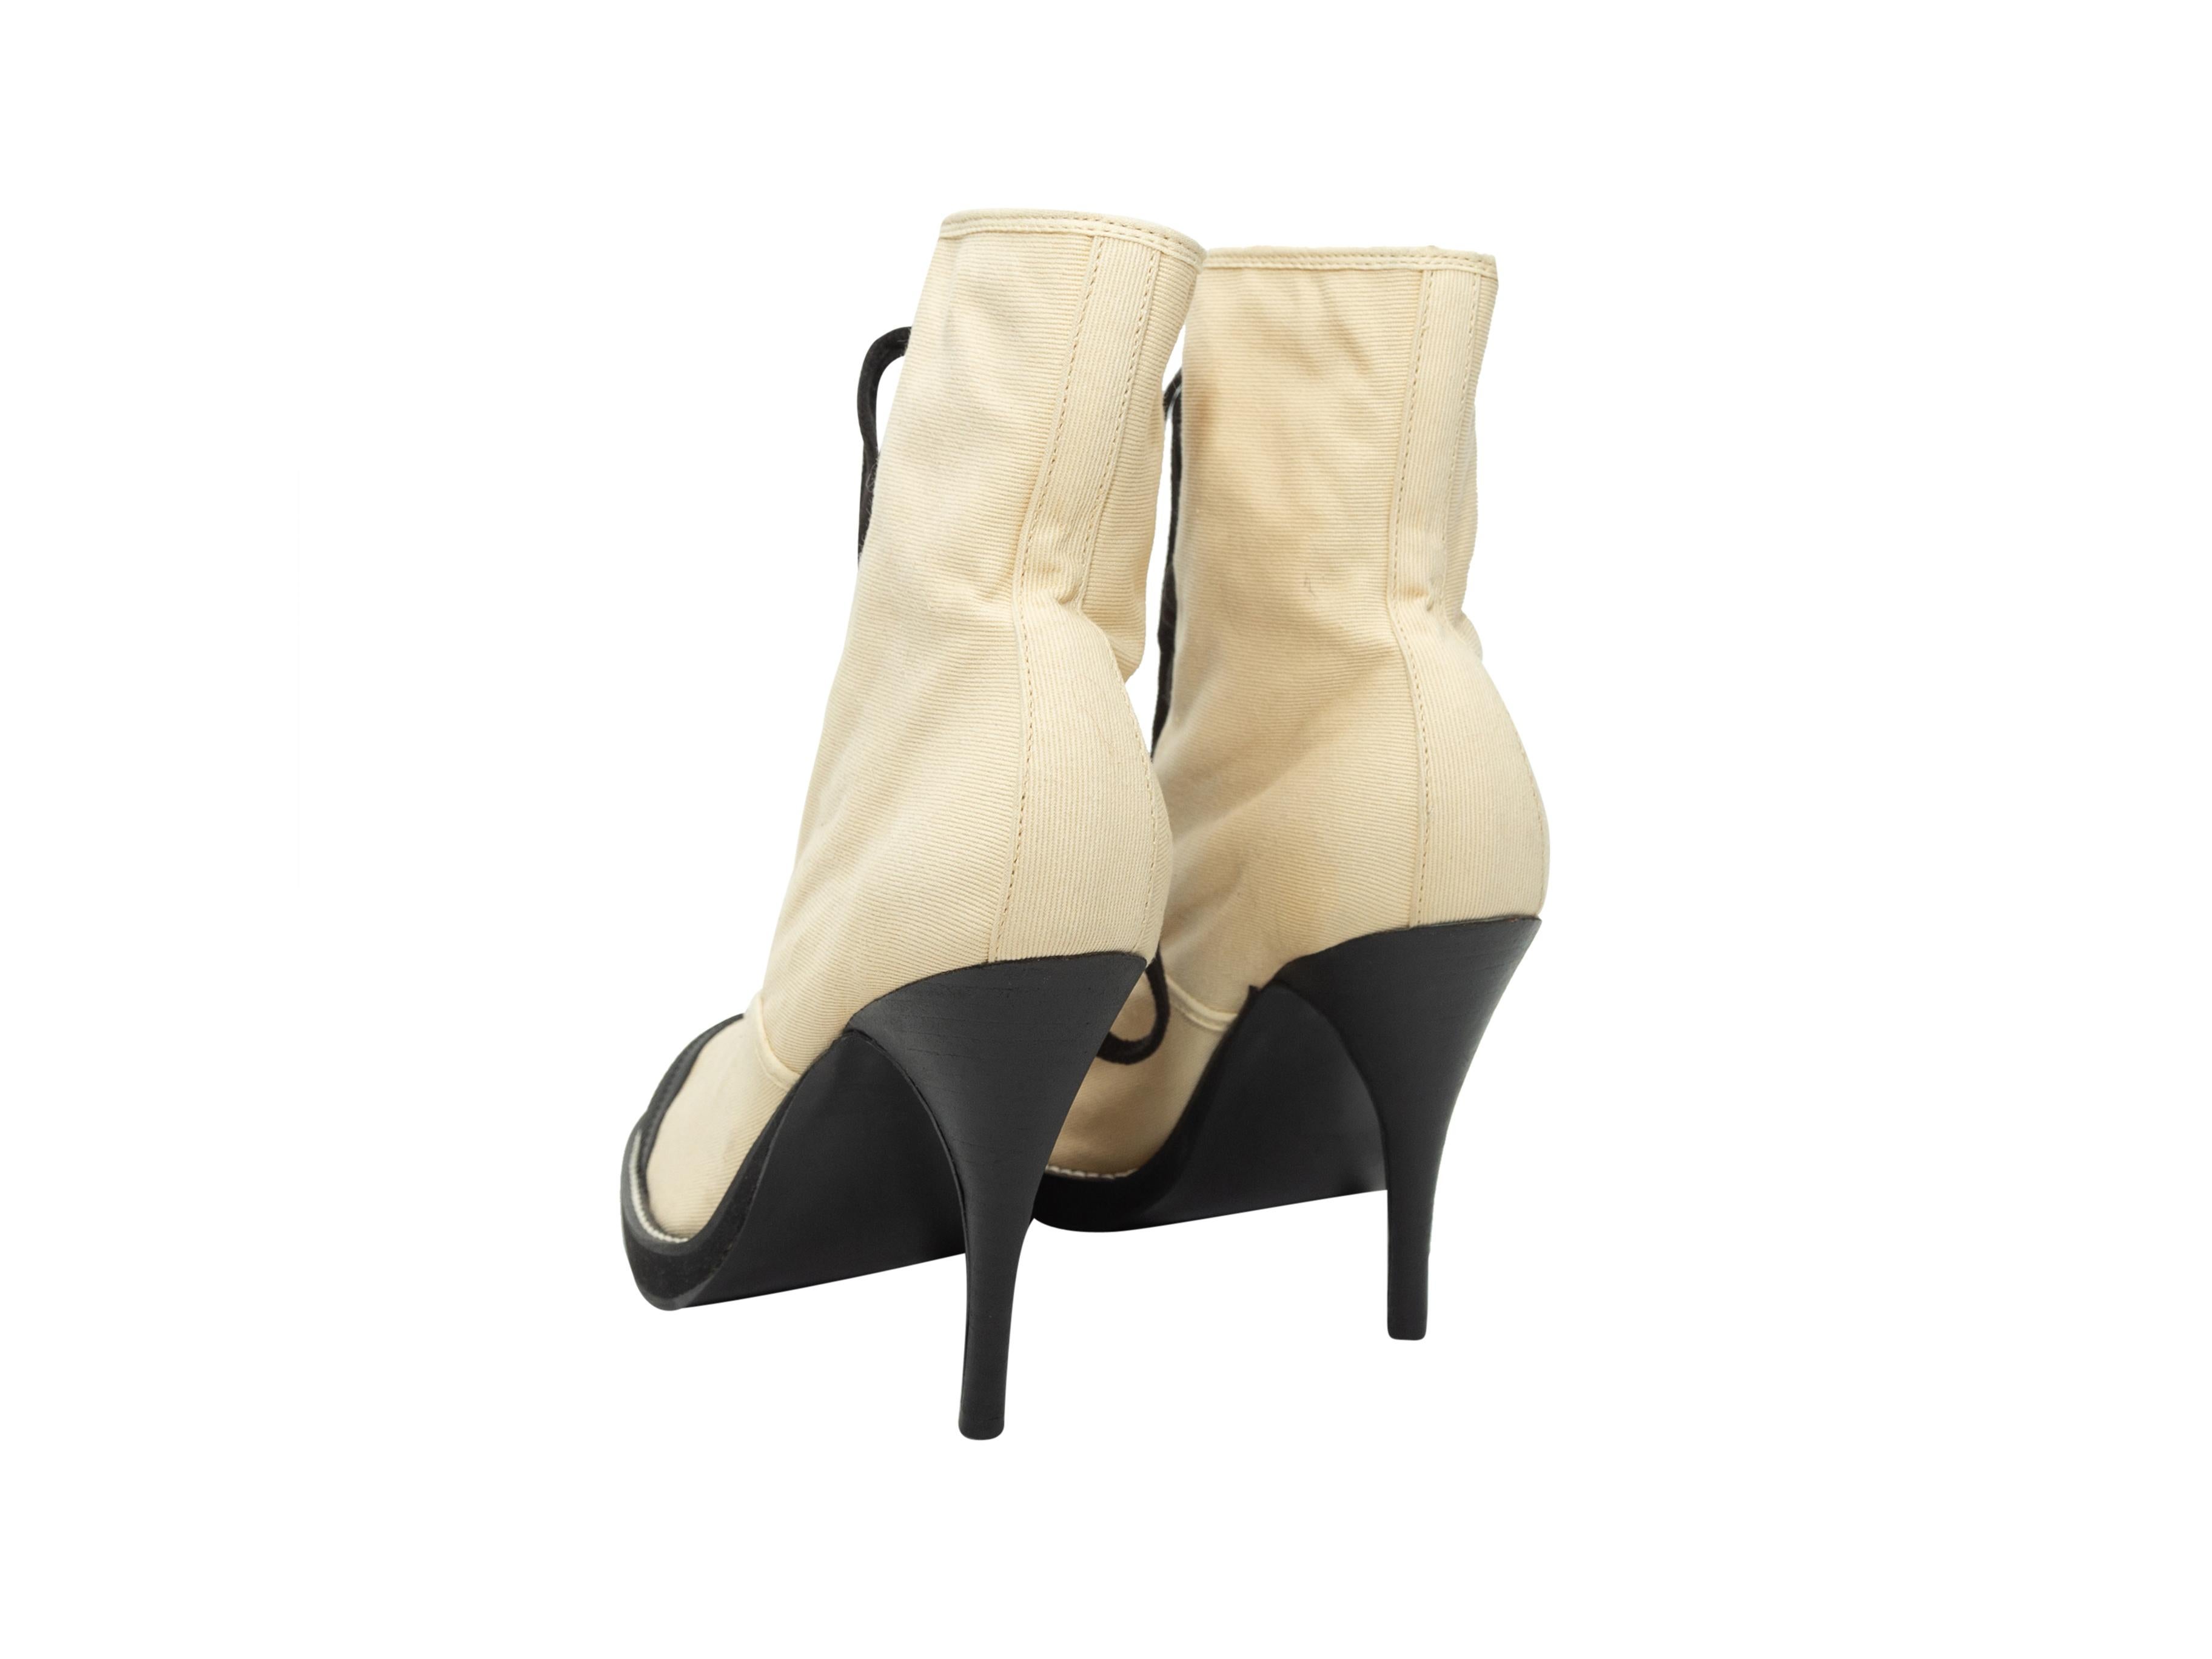 Junior Gaultier Cream & Black Canvas Cap-Toe Booties In Excellent Condition For Sale In New York, NY